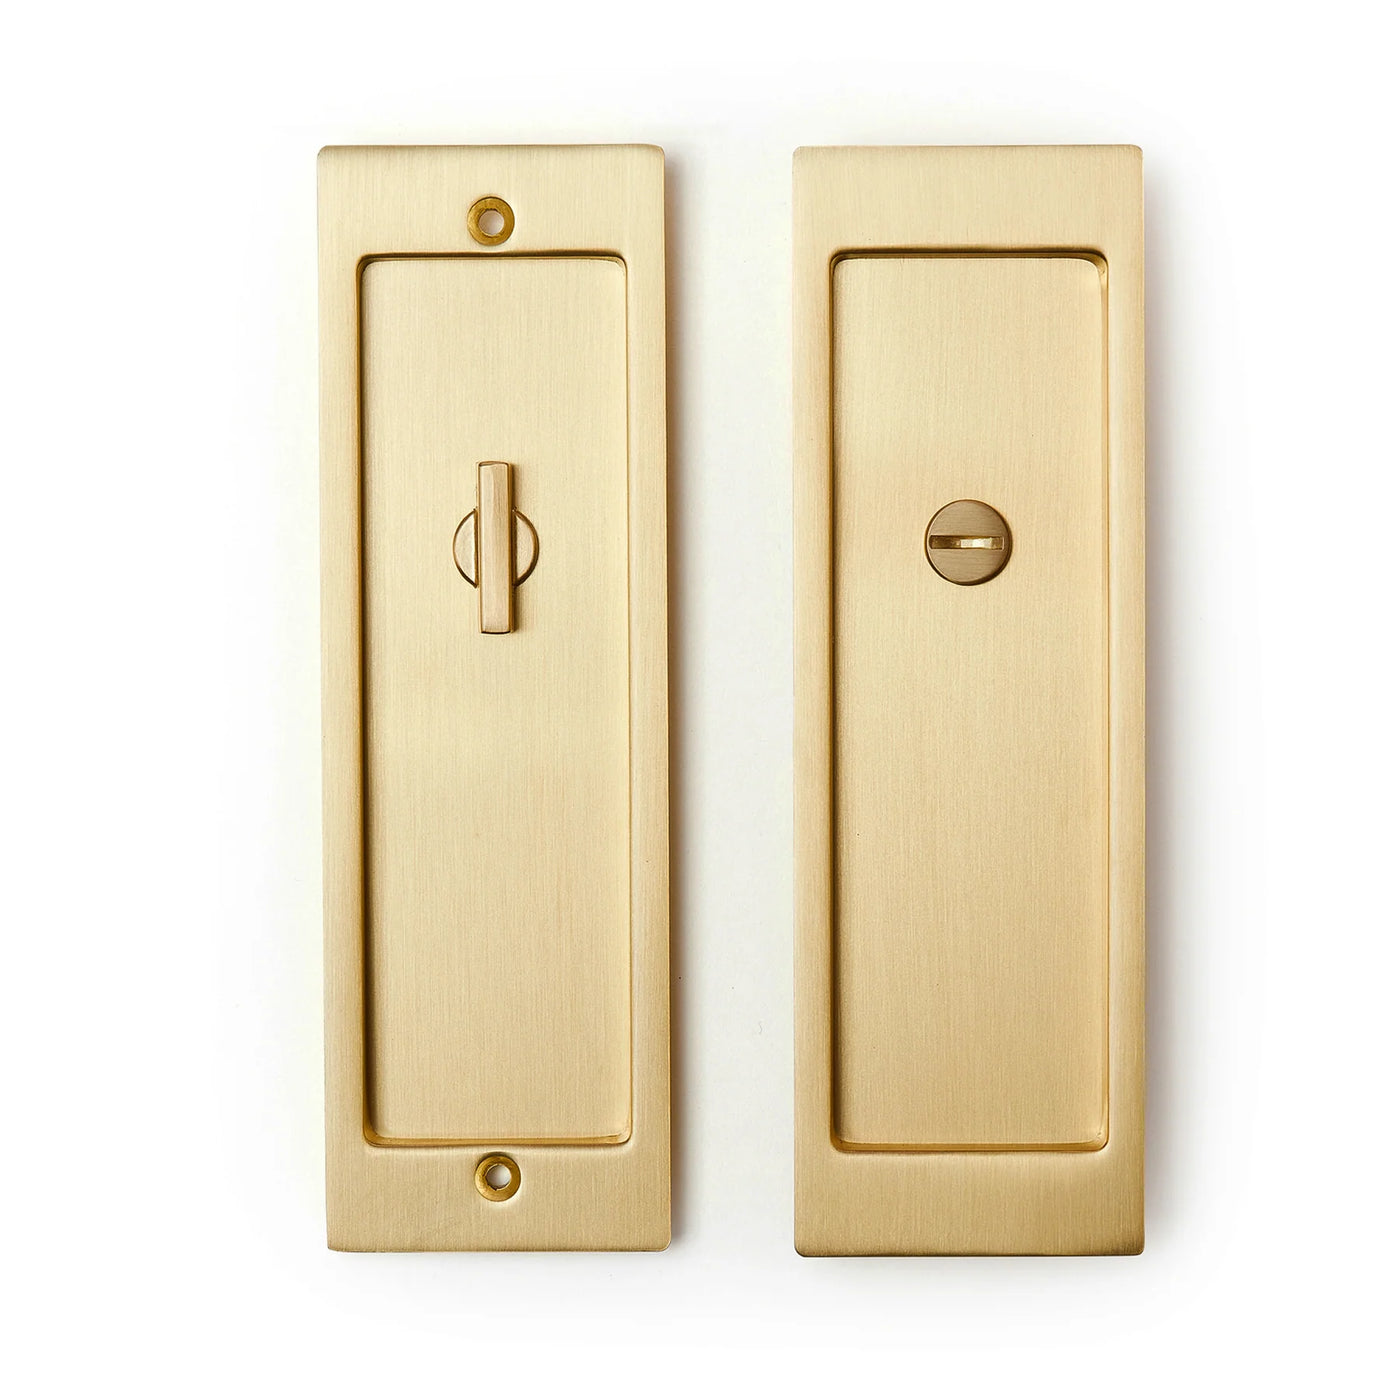 A pair of AHI Explore Pocket Door Set Privacy brass door handles on a white background.